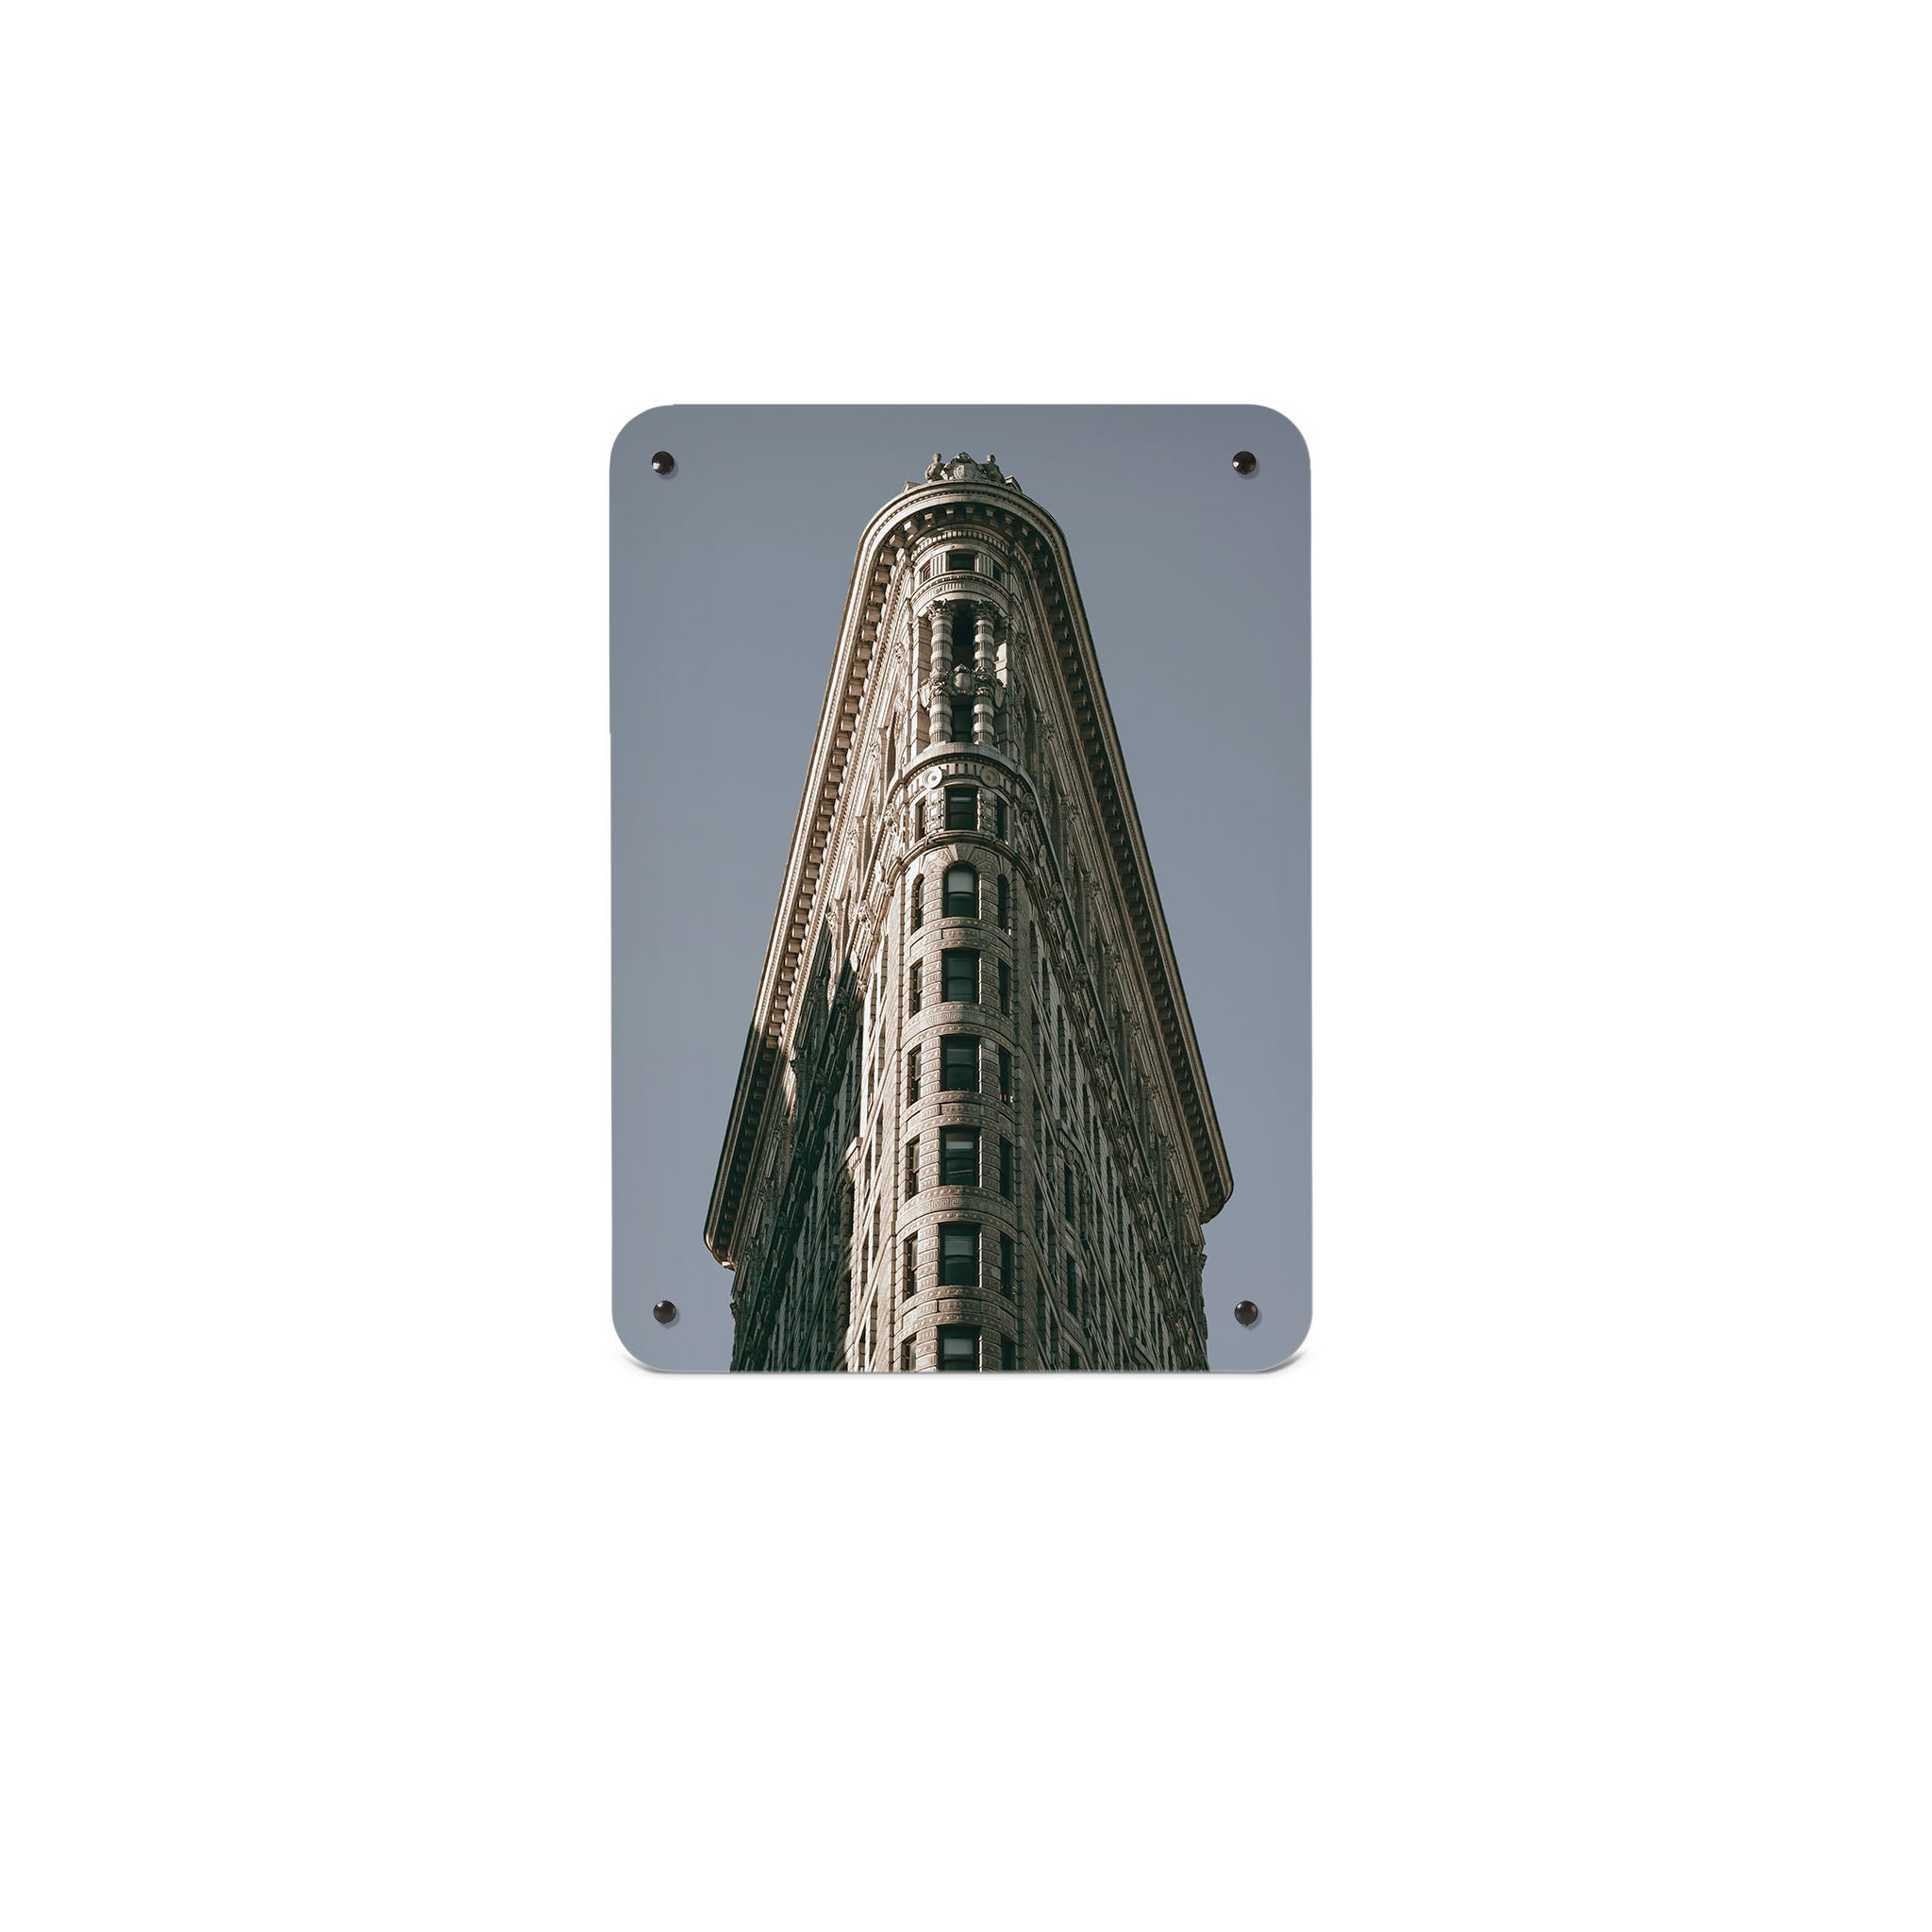 A small magnetic notice board by Beyond the Fridge with an image of the flatiron building in Manhattan 